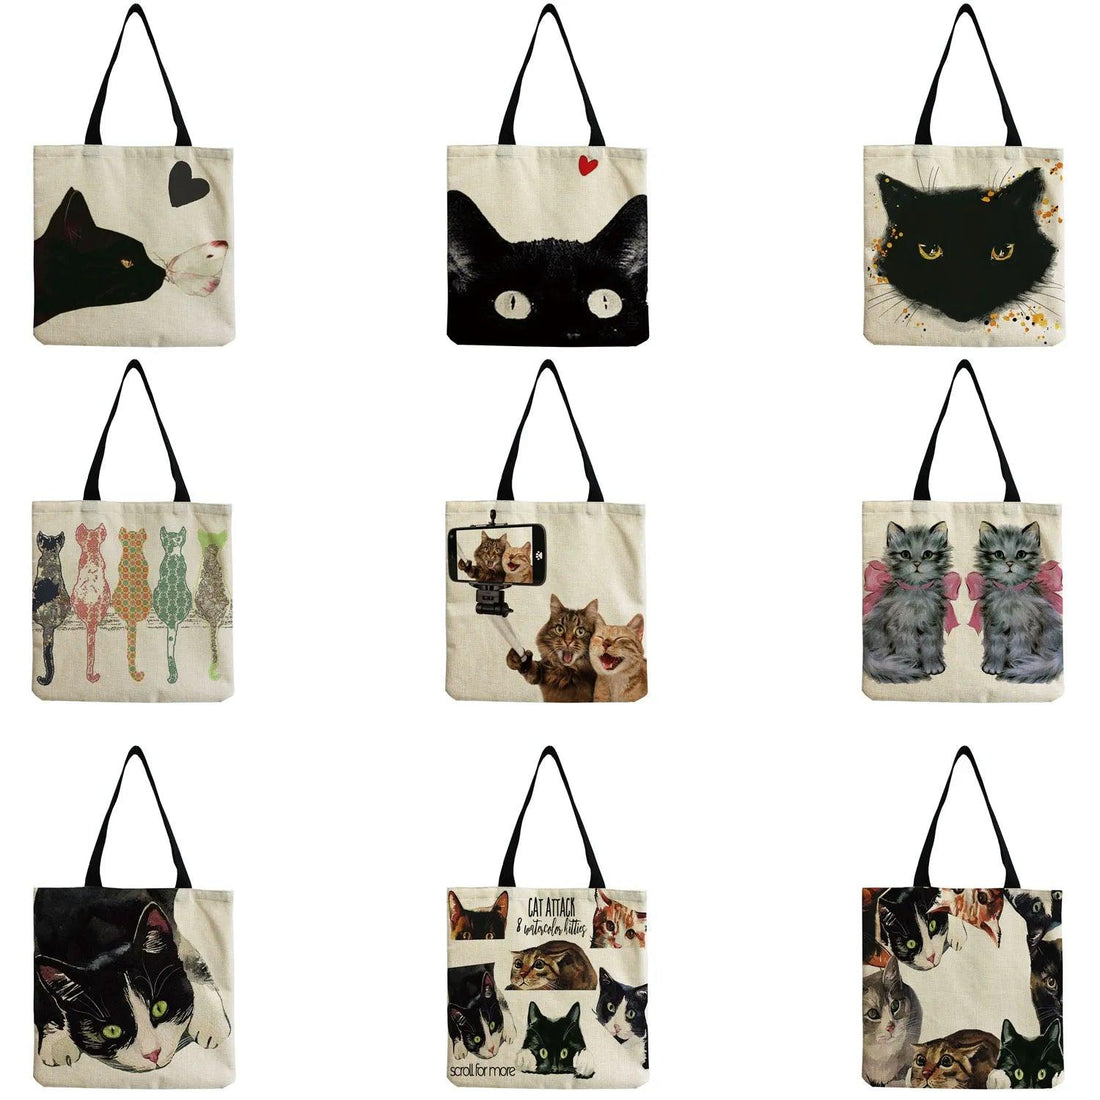 Vintage Style Cute Cat Printed Tote bag/Shopping bag, 10 designs - Just Cats - Gifts for Cat Lovers